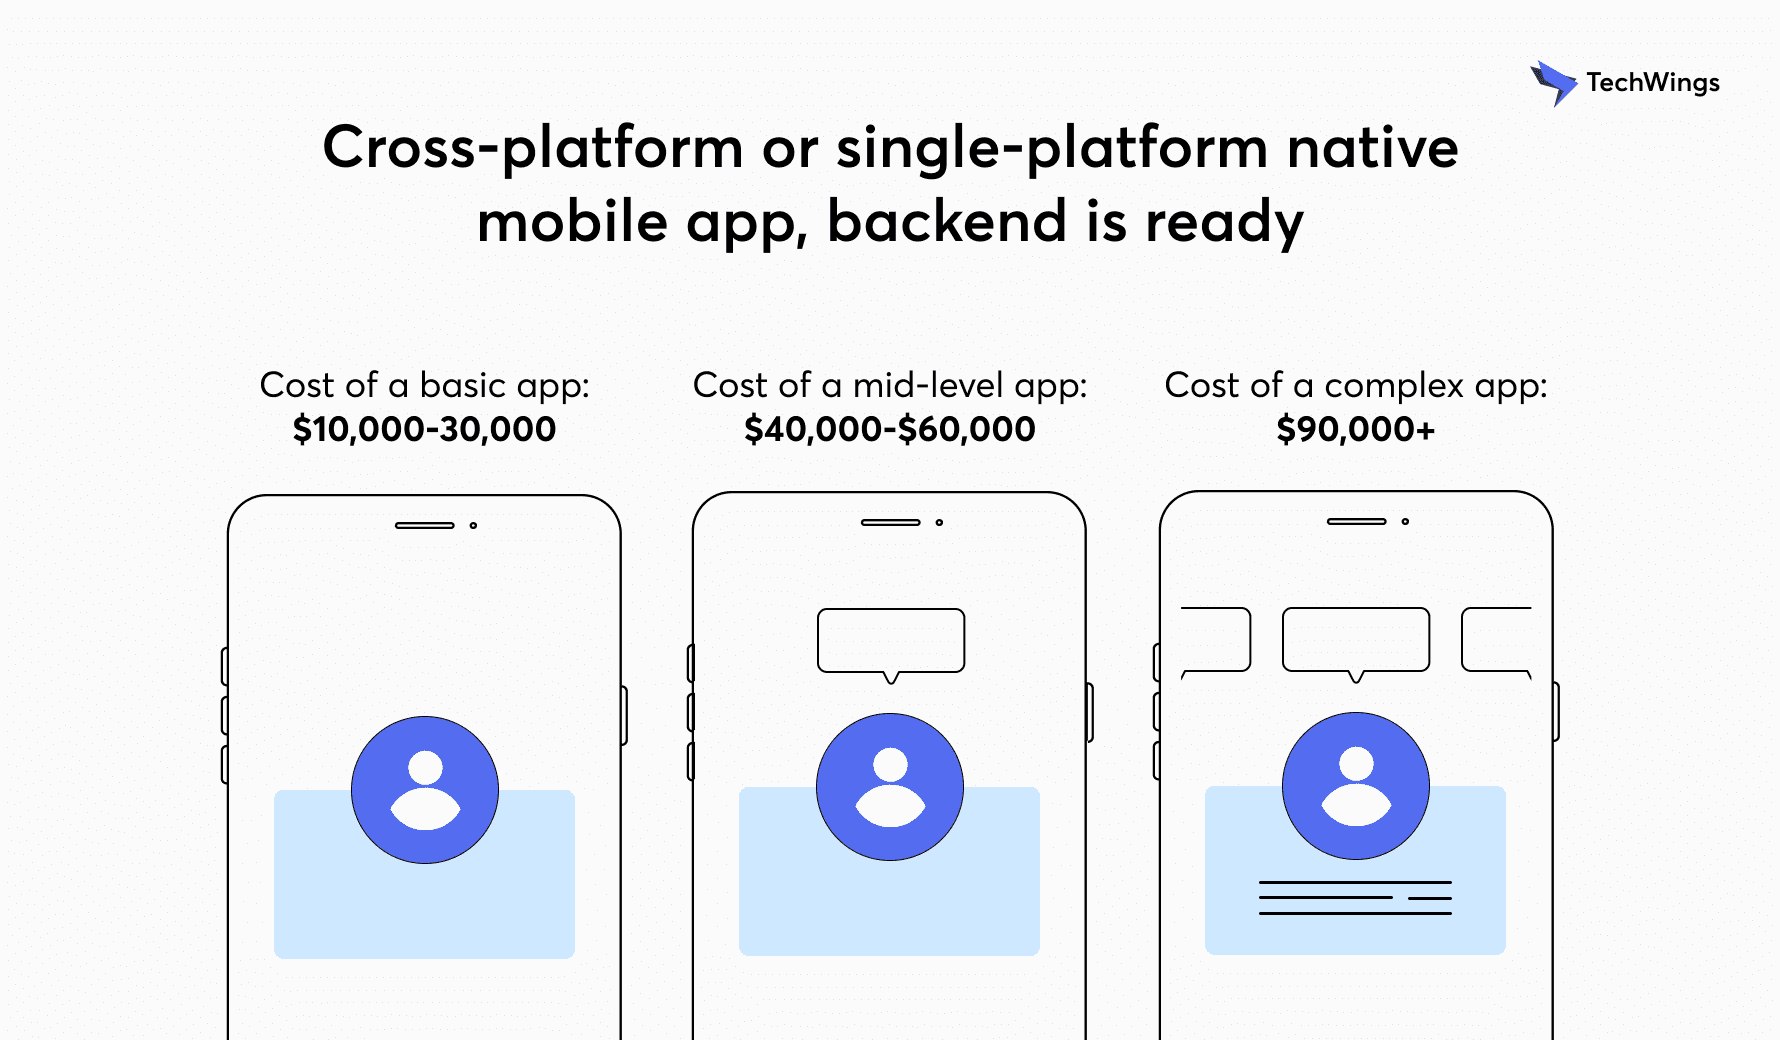 Why build a whole new mobile app when the current one works fine